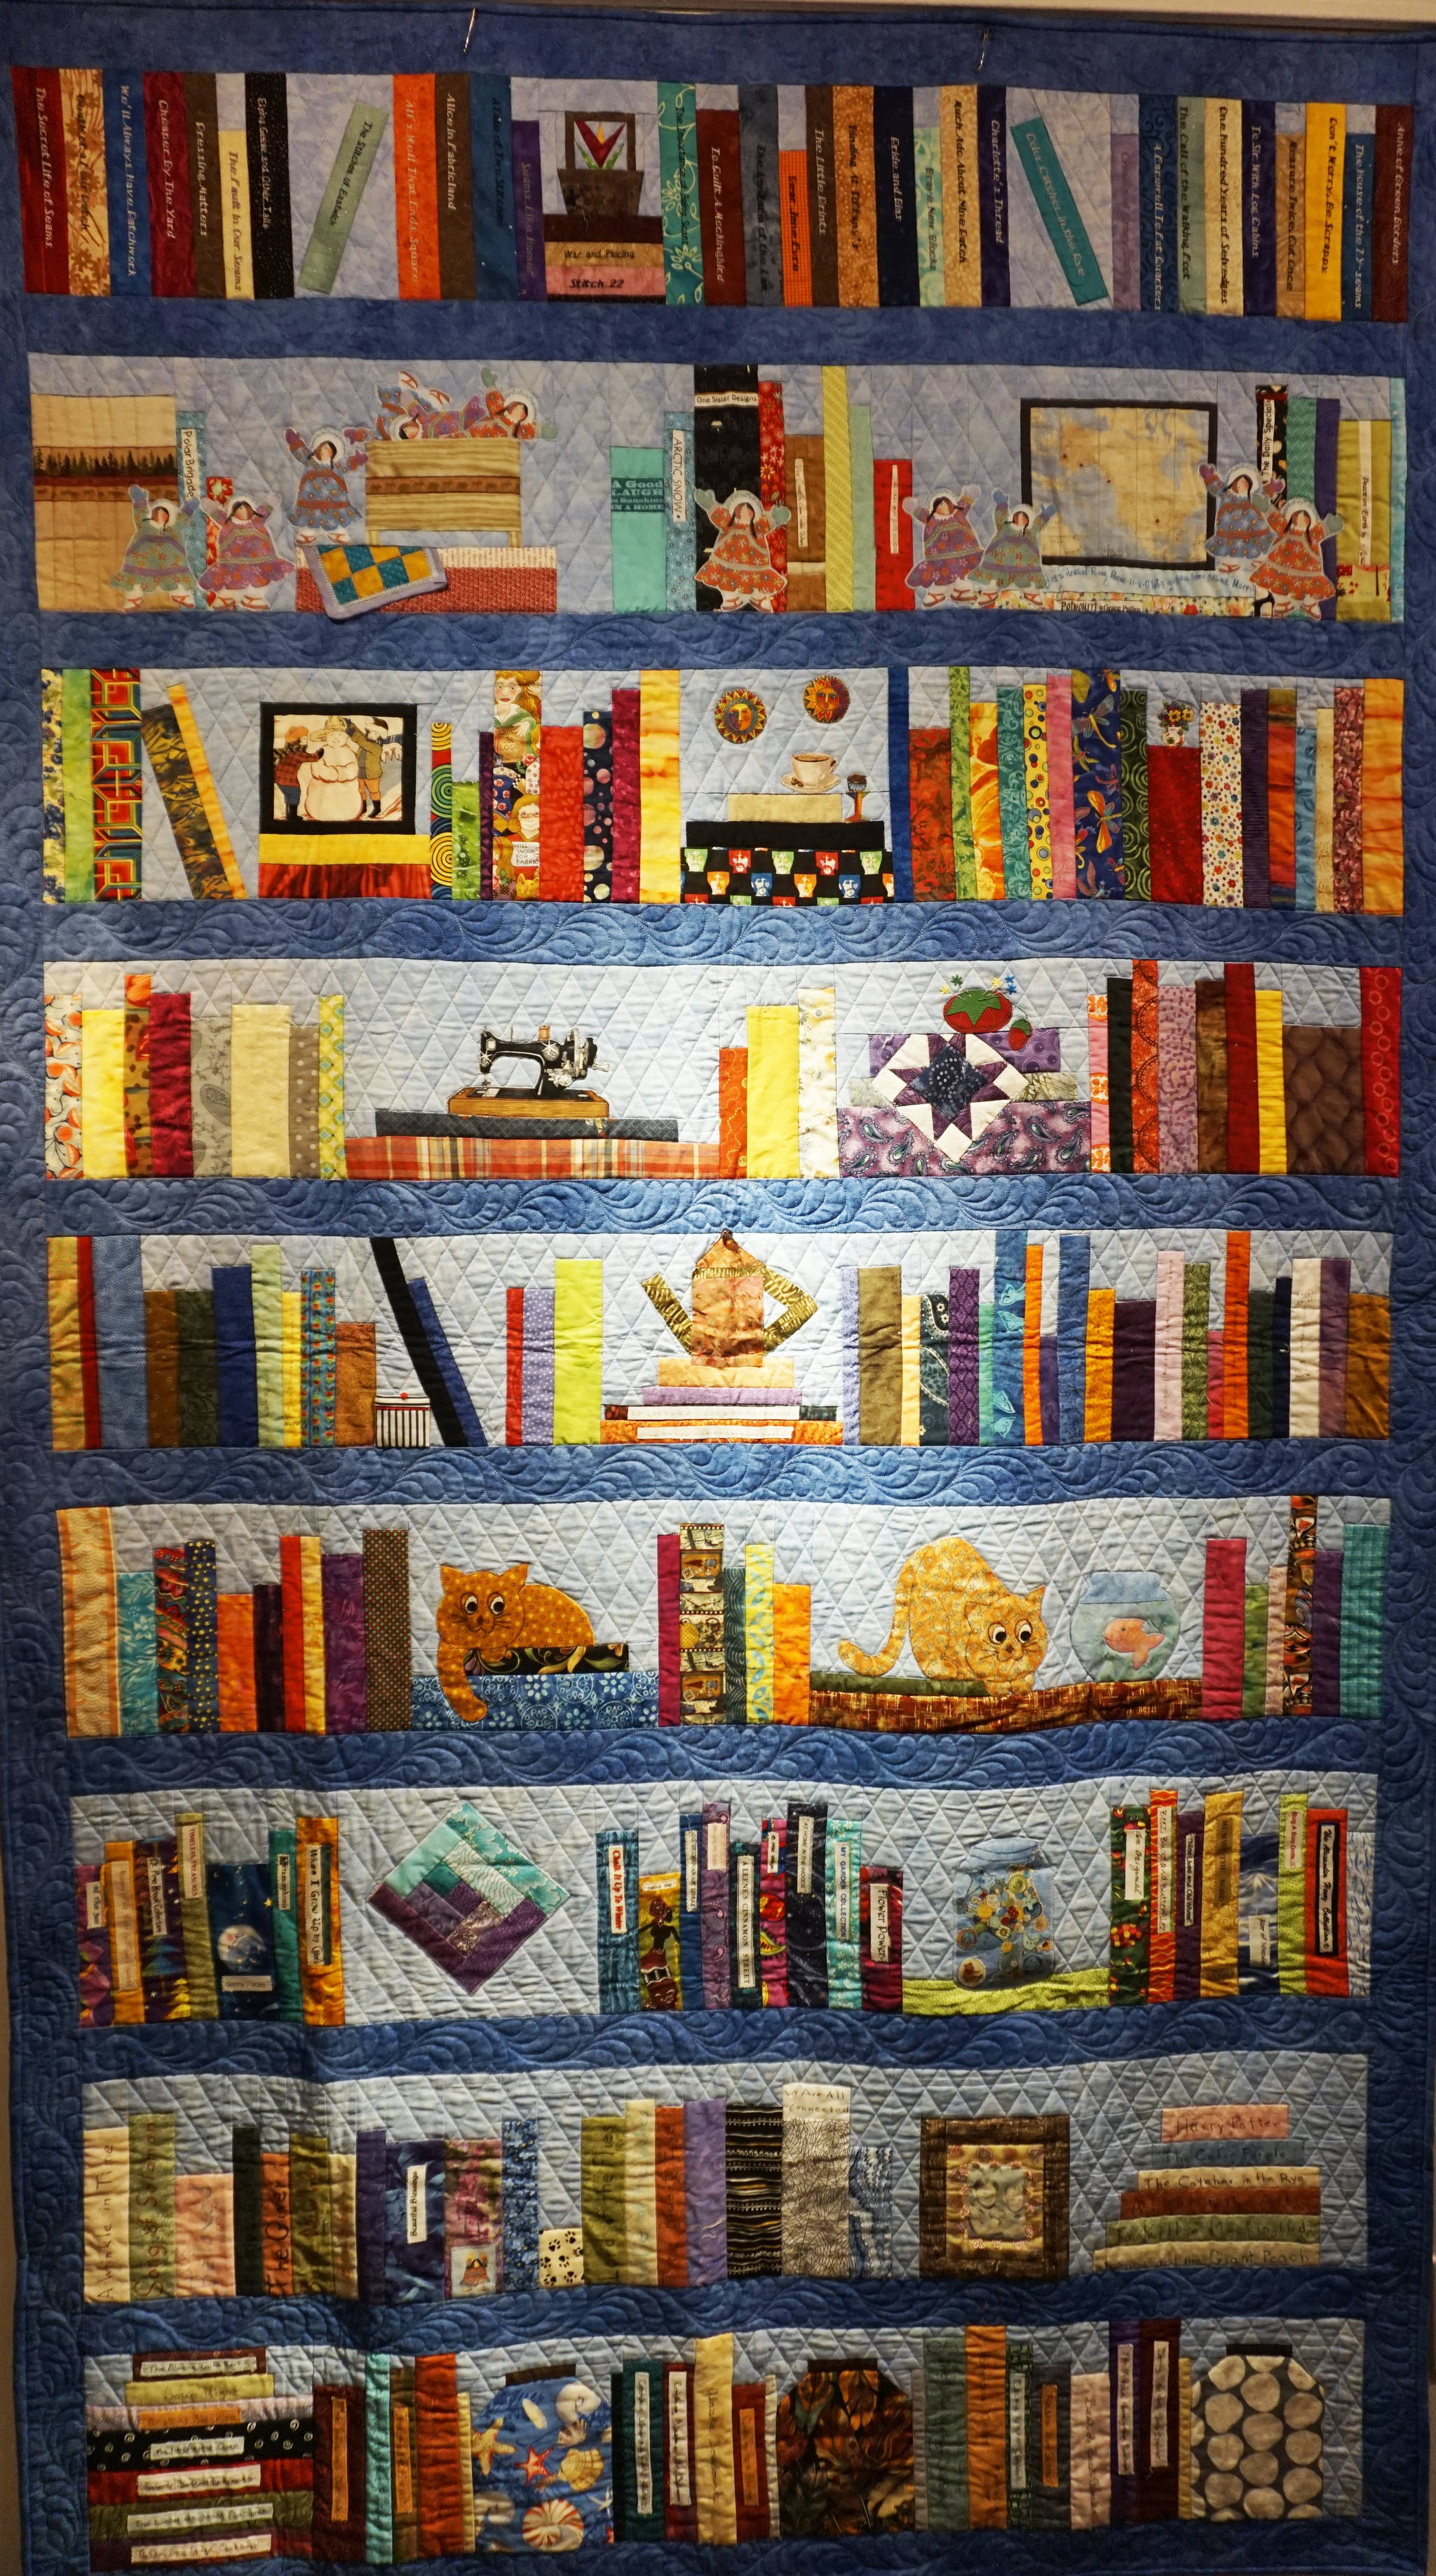 Ruby Nofziger’s “On a Bookshelf” quilt, one of the works in the “9 Women / 9 Quilts” show that opened last Friday, Feb. 1, 2019, at the Homer Council on the Arts, in Homer, Alaska. (Photo by Michael Armstrong/Homer News)